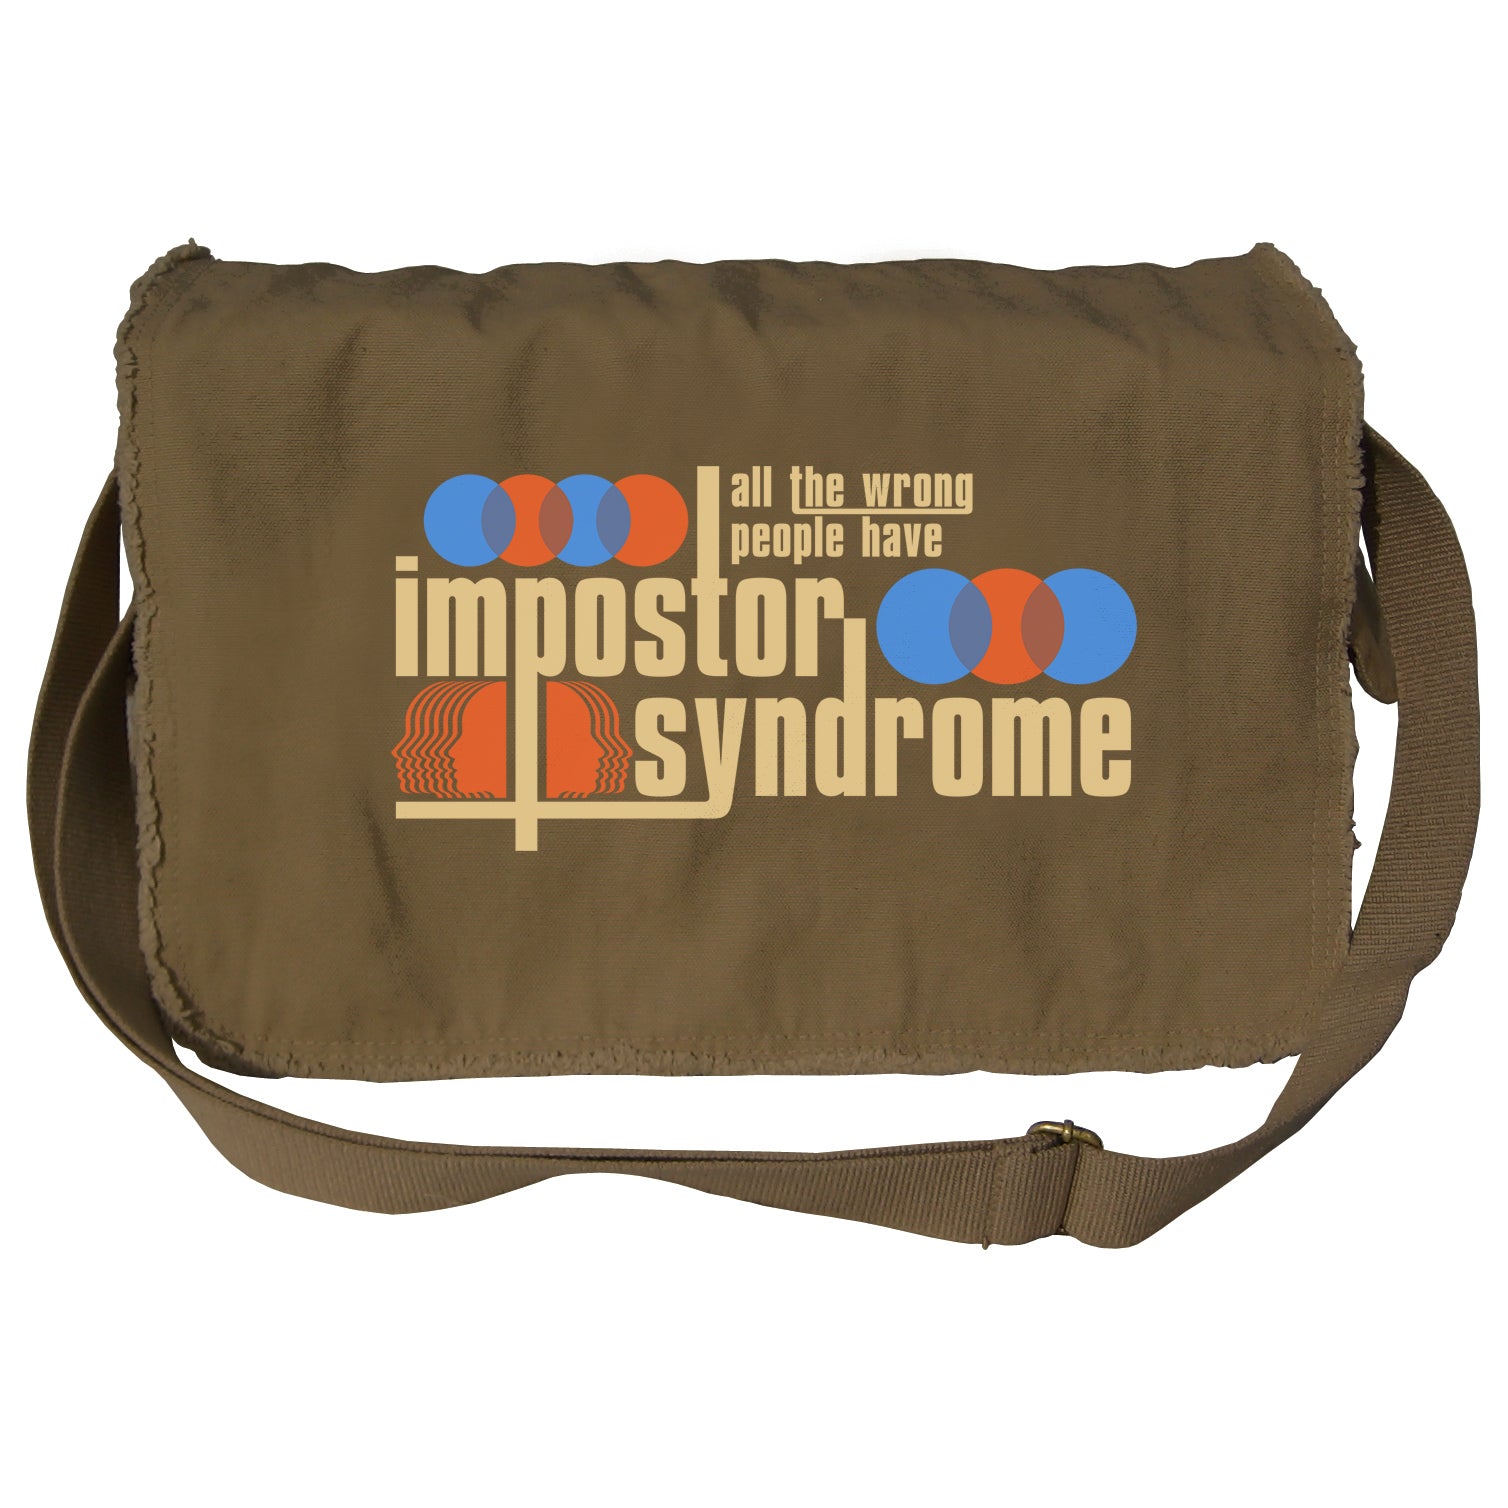 All The Wrong People Have Impostor Syndrome Messenger Bag